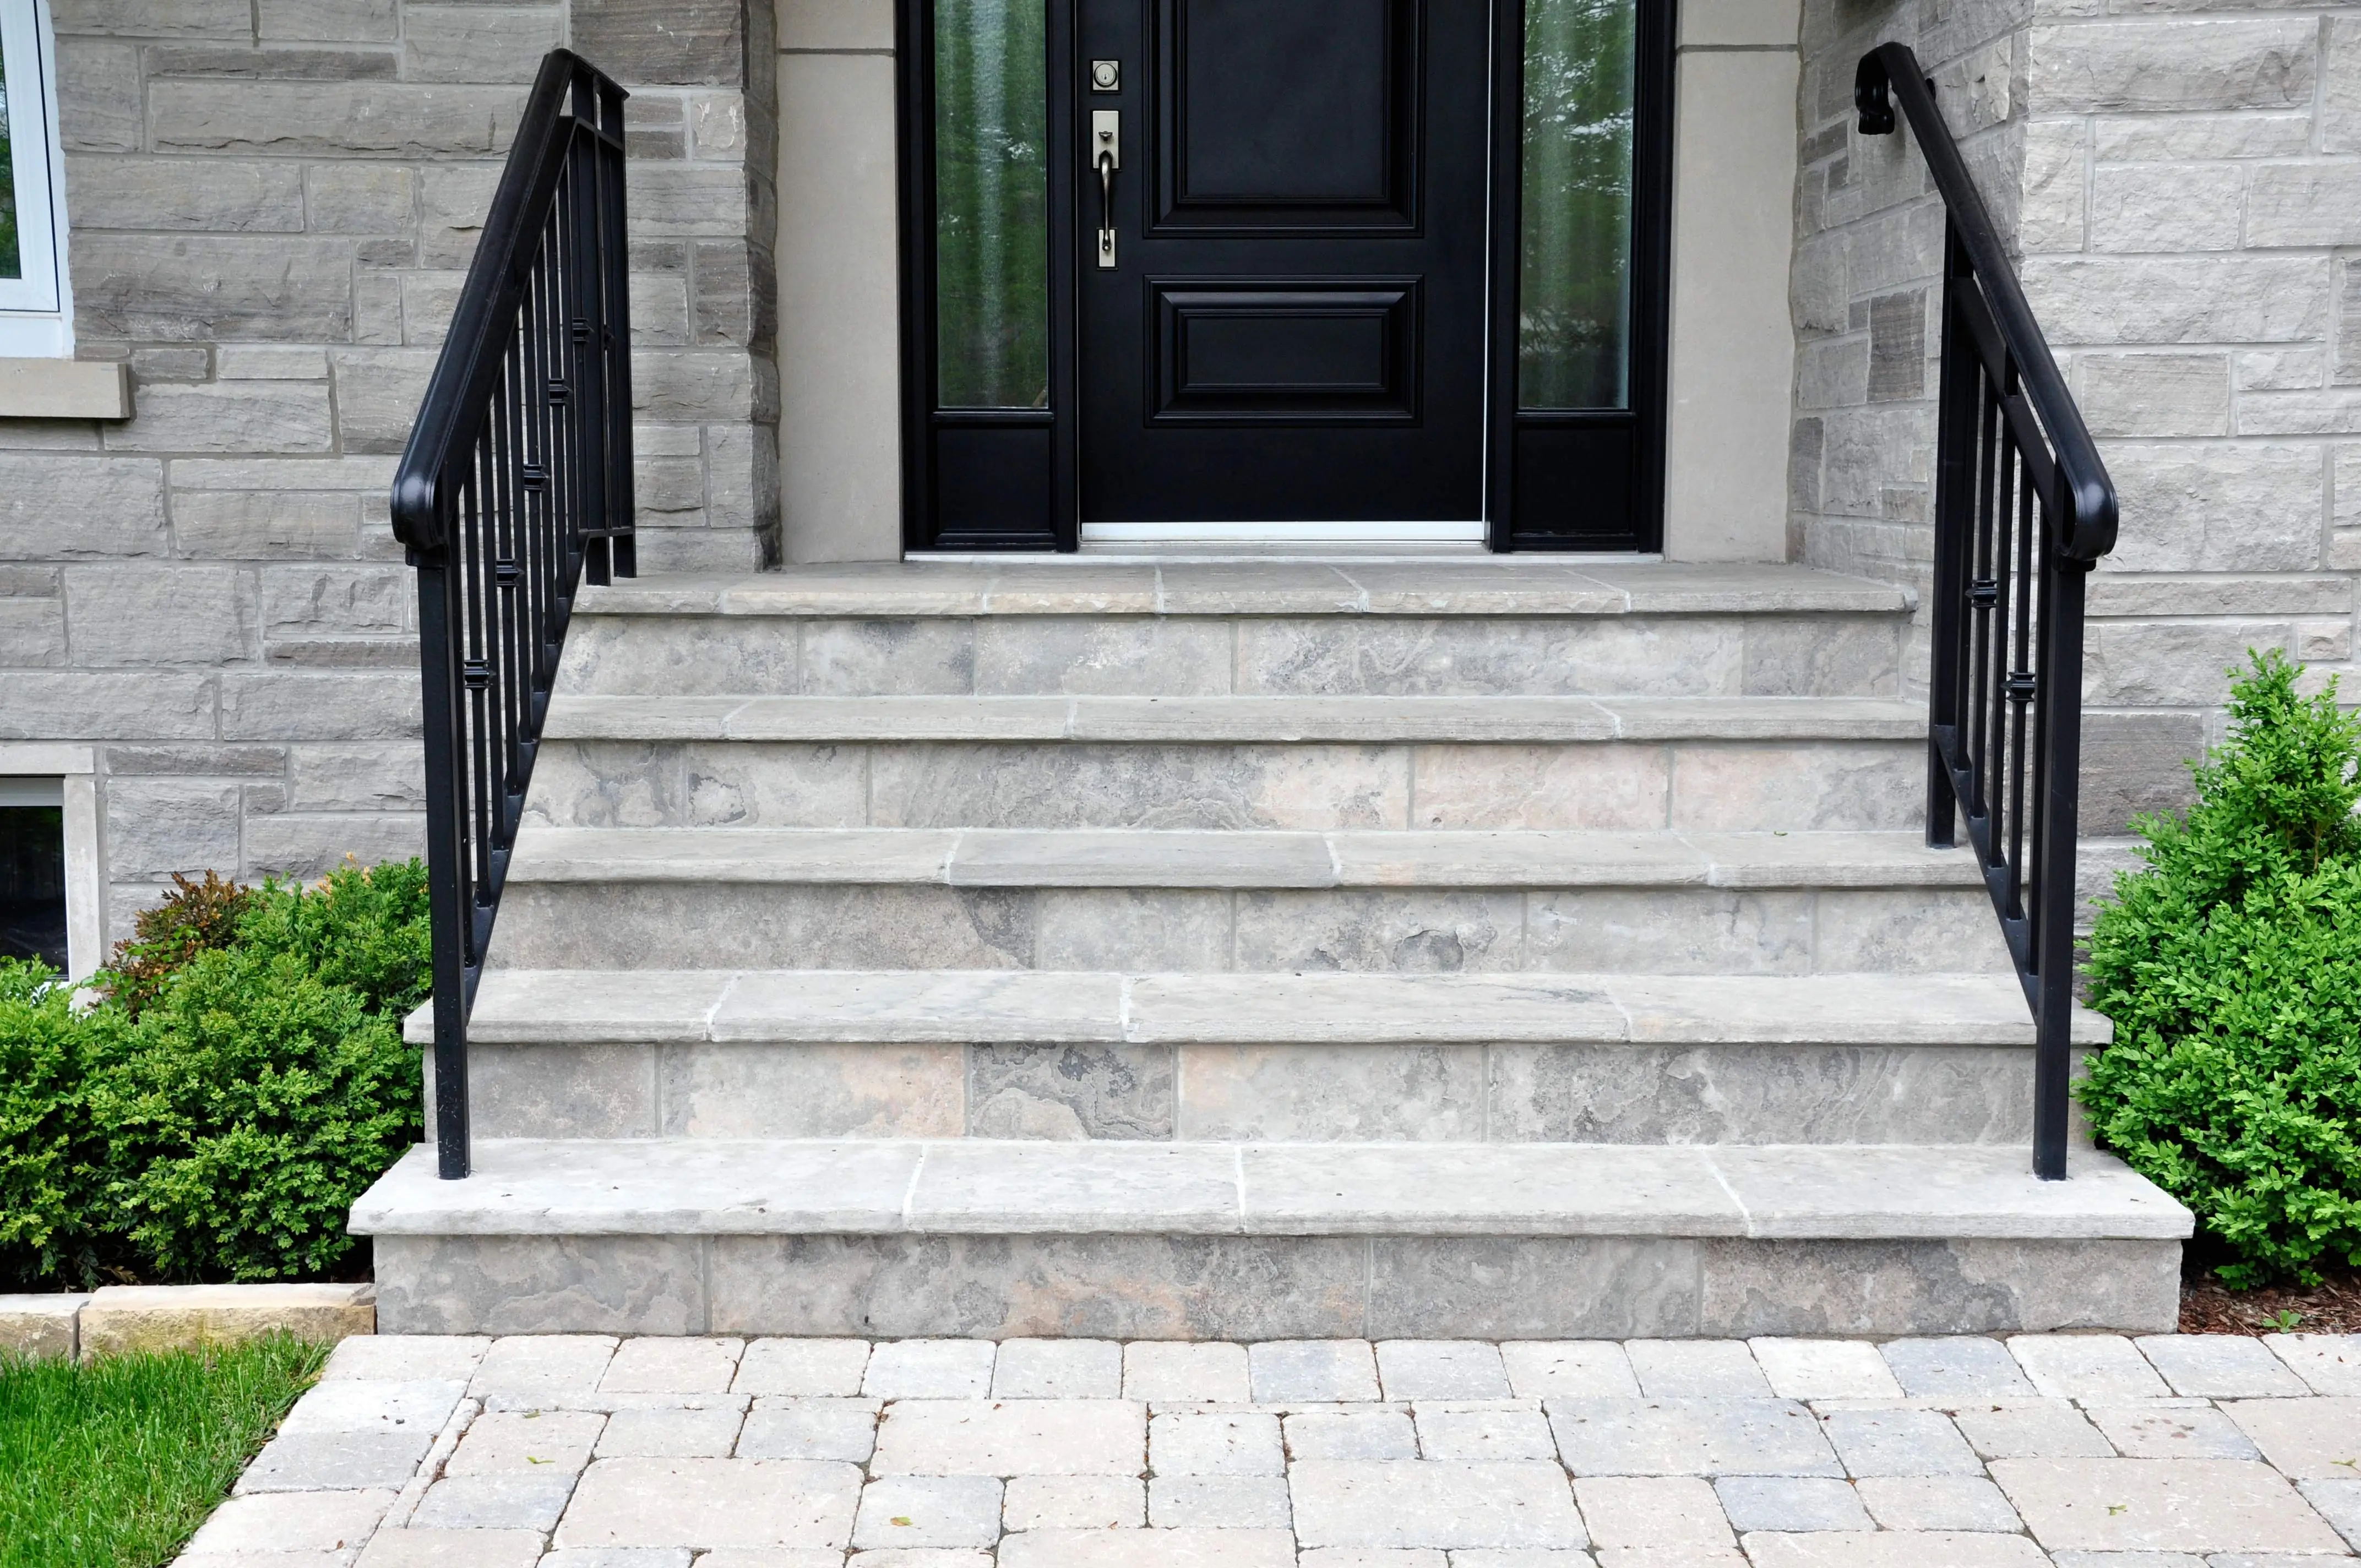 Front steps and landing with black railings constructed by experienced masonry contractors in Villanova.